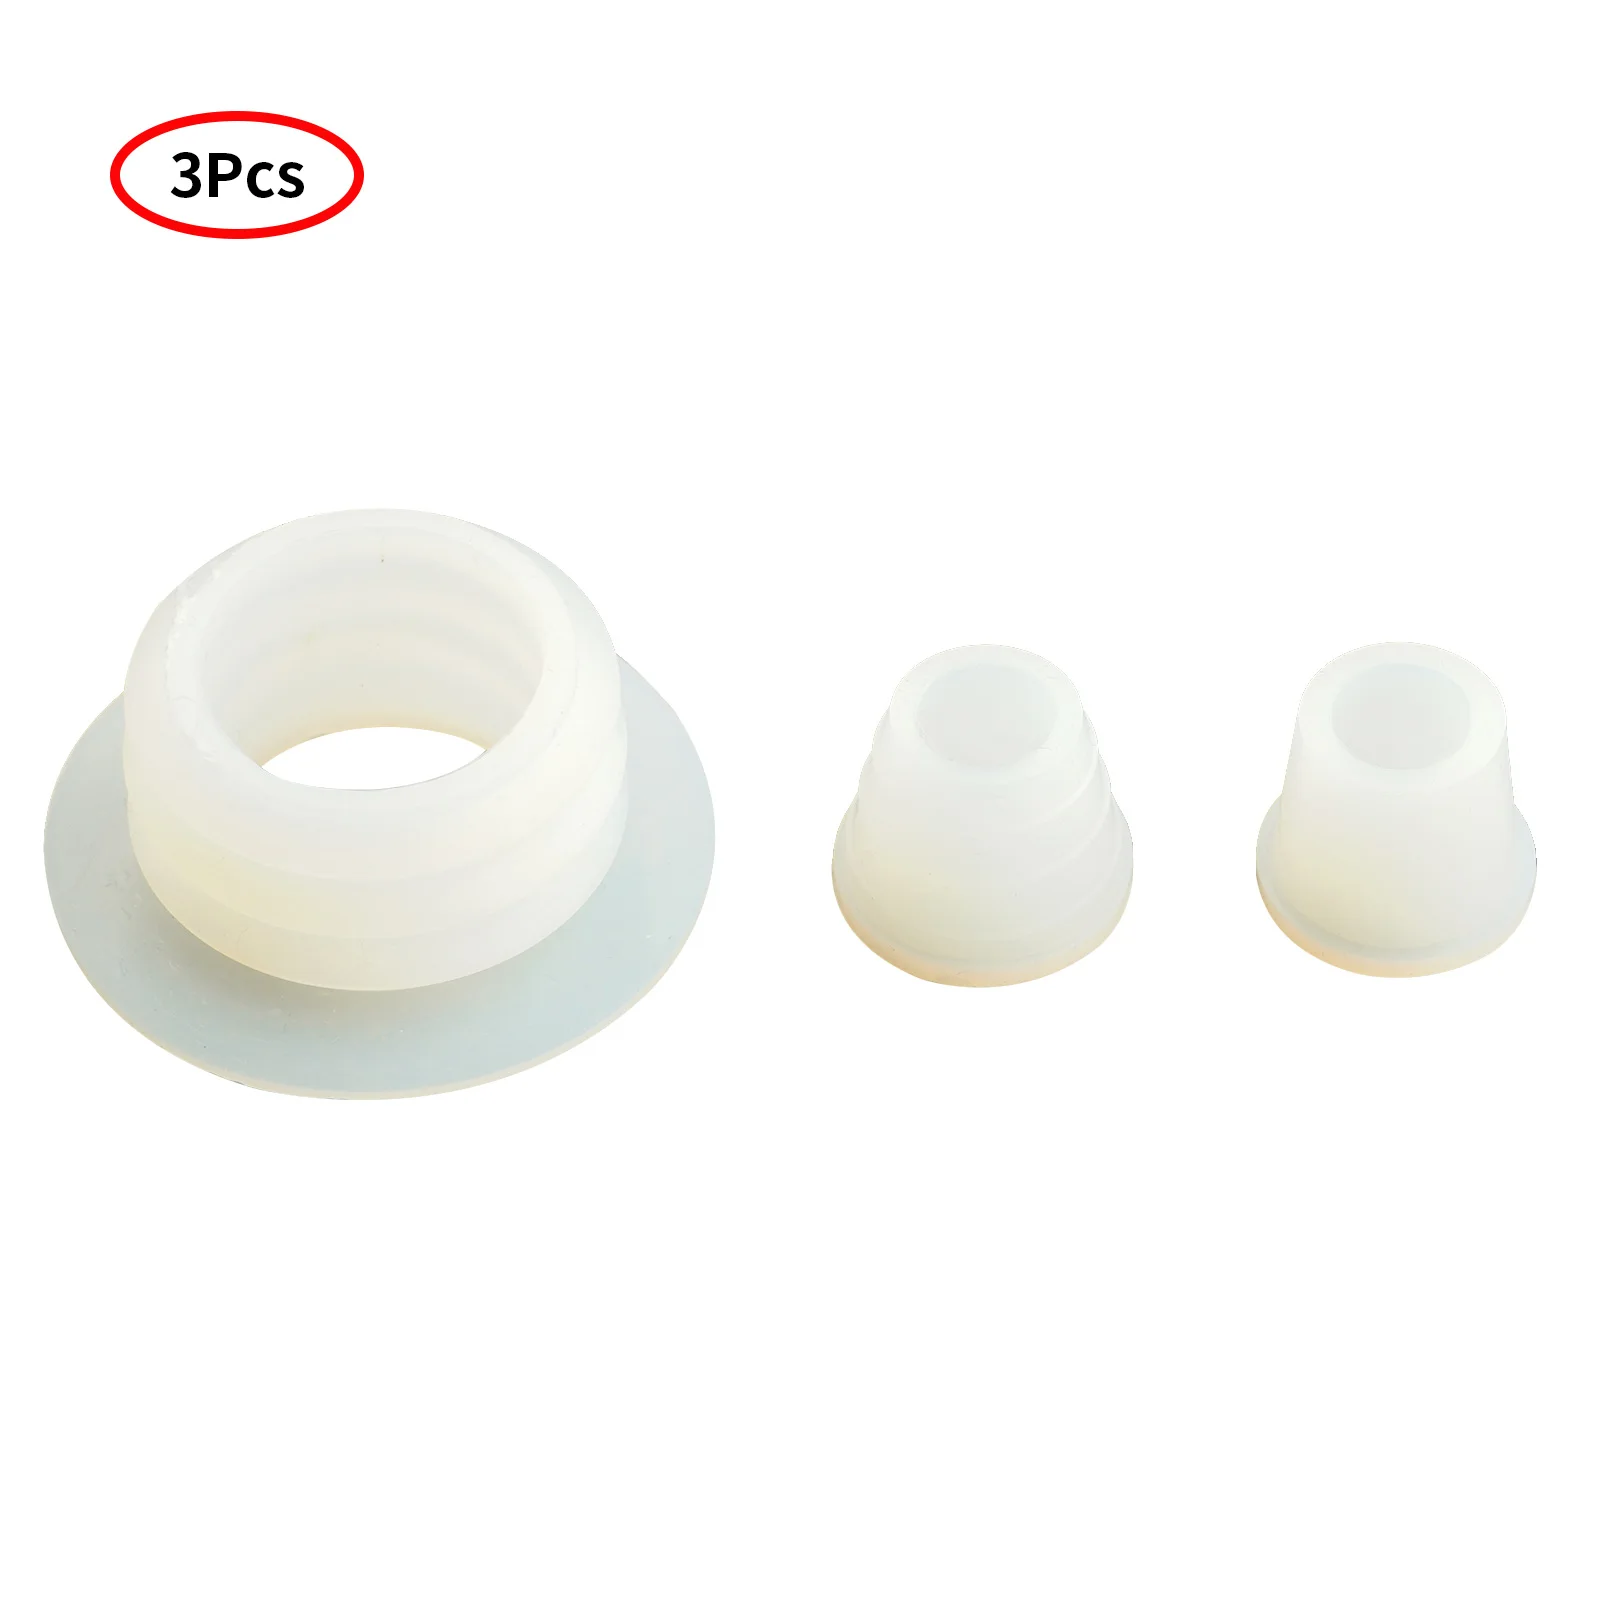 Small Diff Size Lot of 3X Silicone Hookah Shisha Stem Bowl and Hose Grommets